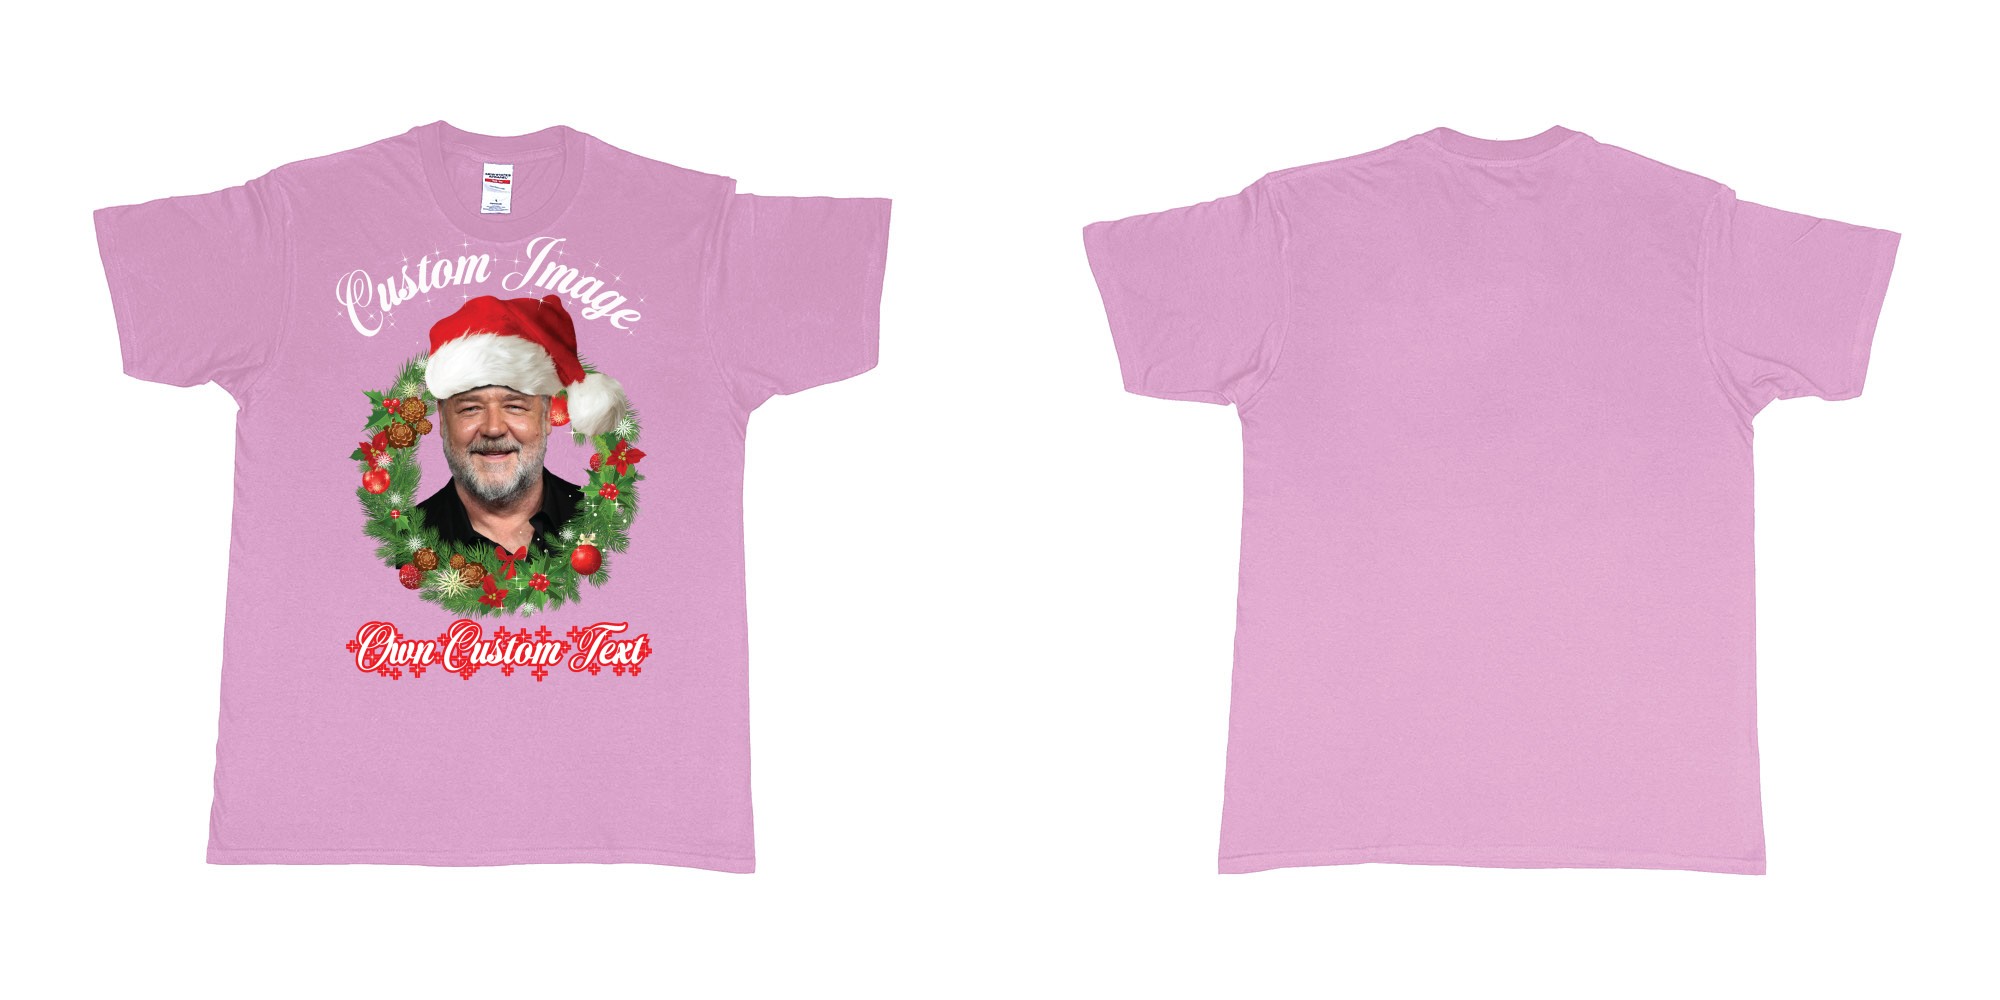 Custom tshirt design christmas wreath custom face image text in fabric color light-pink choice your own text made in Bali by The Pirate Way